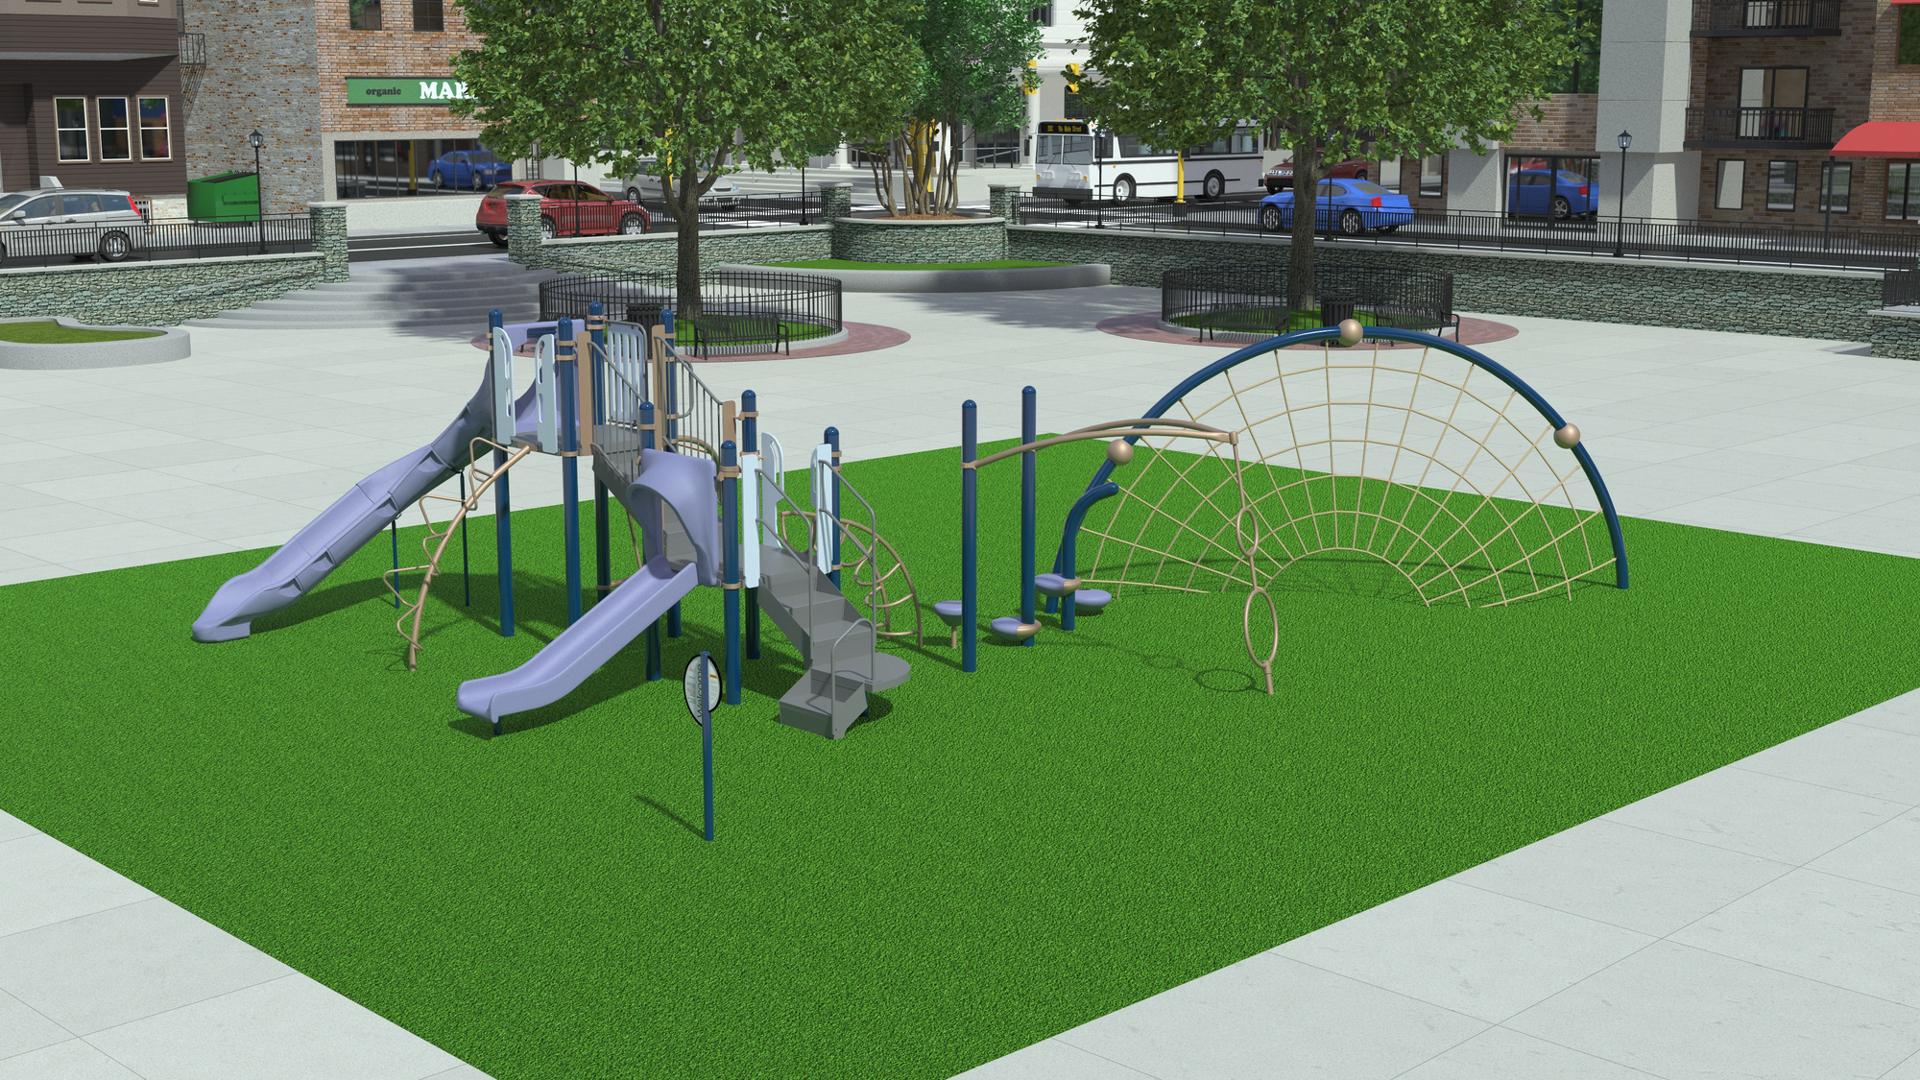 3D high realism image of a playground in a city park. Playground has two light purple slides and a half circle climbing net. 